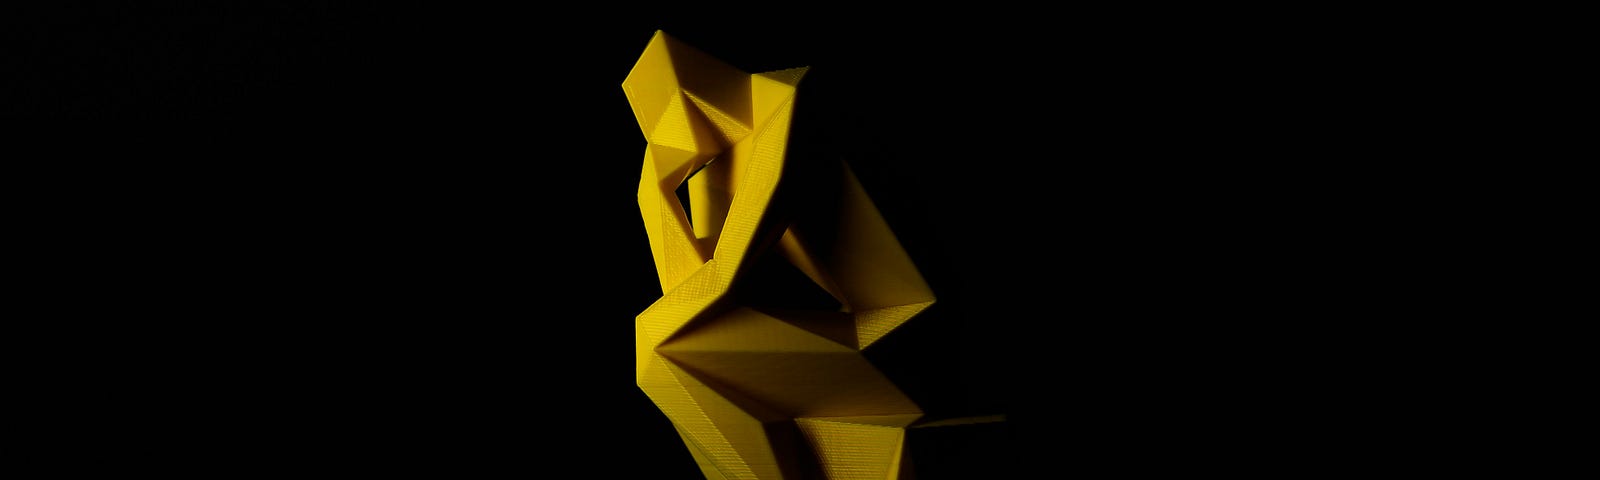 A modern yellow sculpture that evokes Auguste Rodin’s The Thinker against a black background